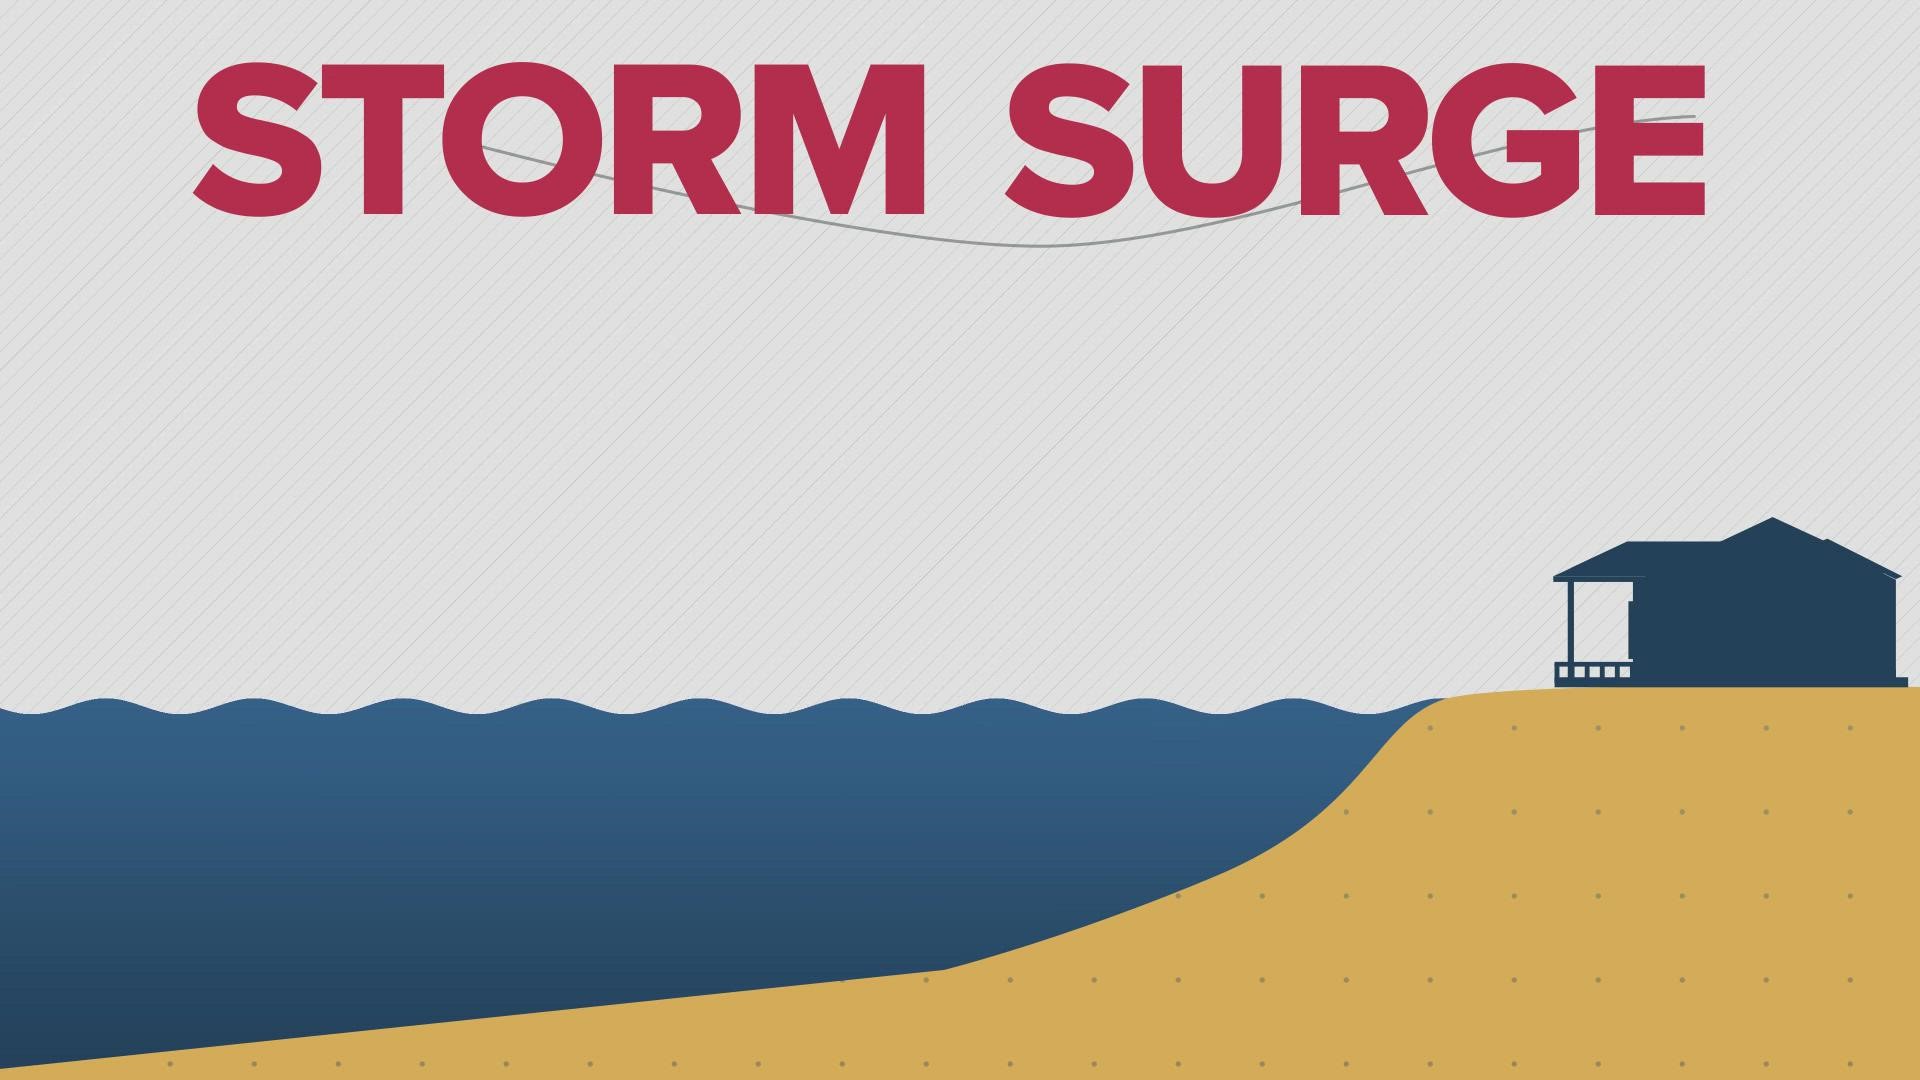 Storm surge happens when the strong winds of a hurricane blow over the ocean or Gulf waters literally forcing the water to pile up as it approaches the coast.